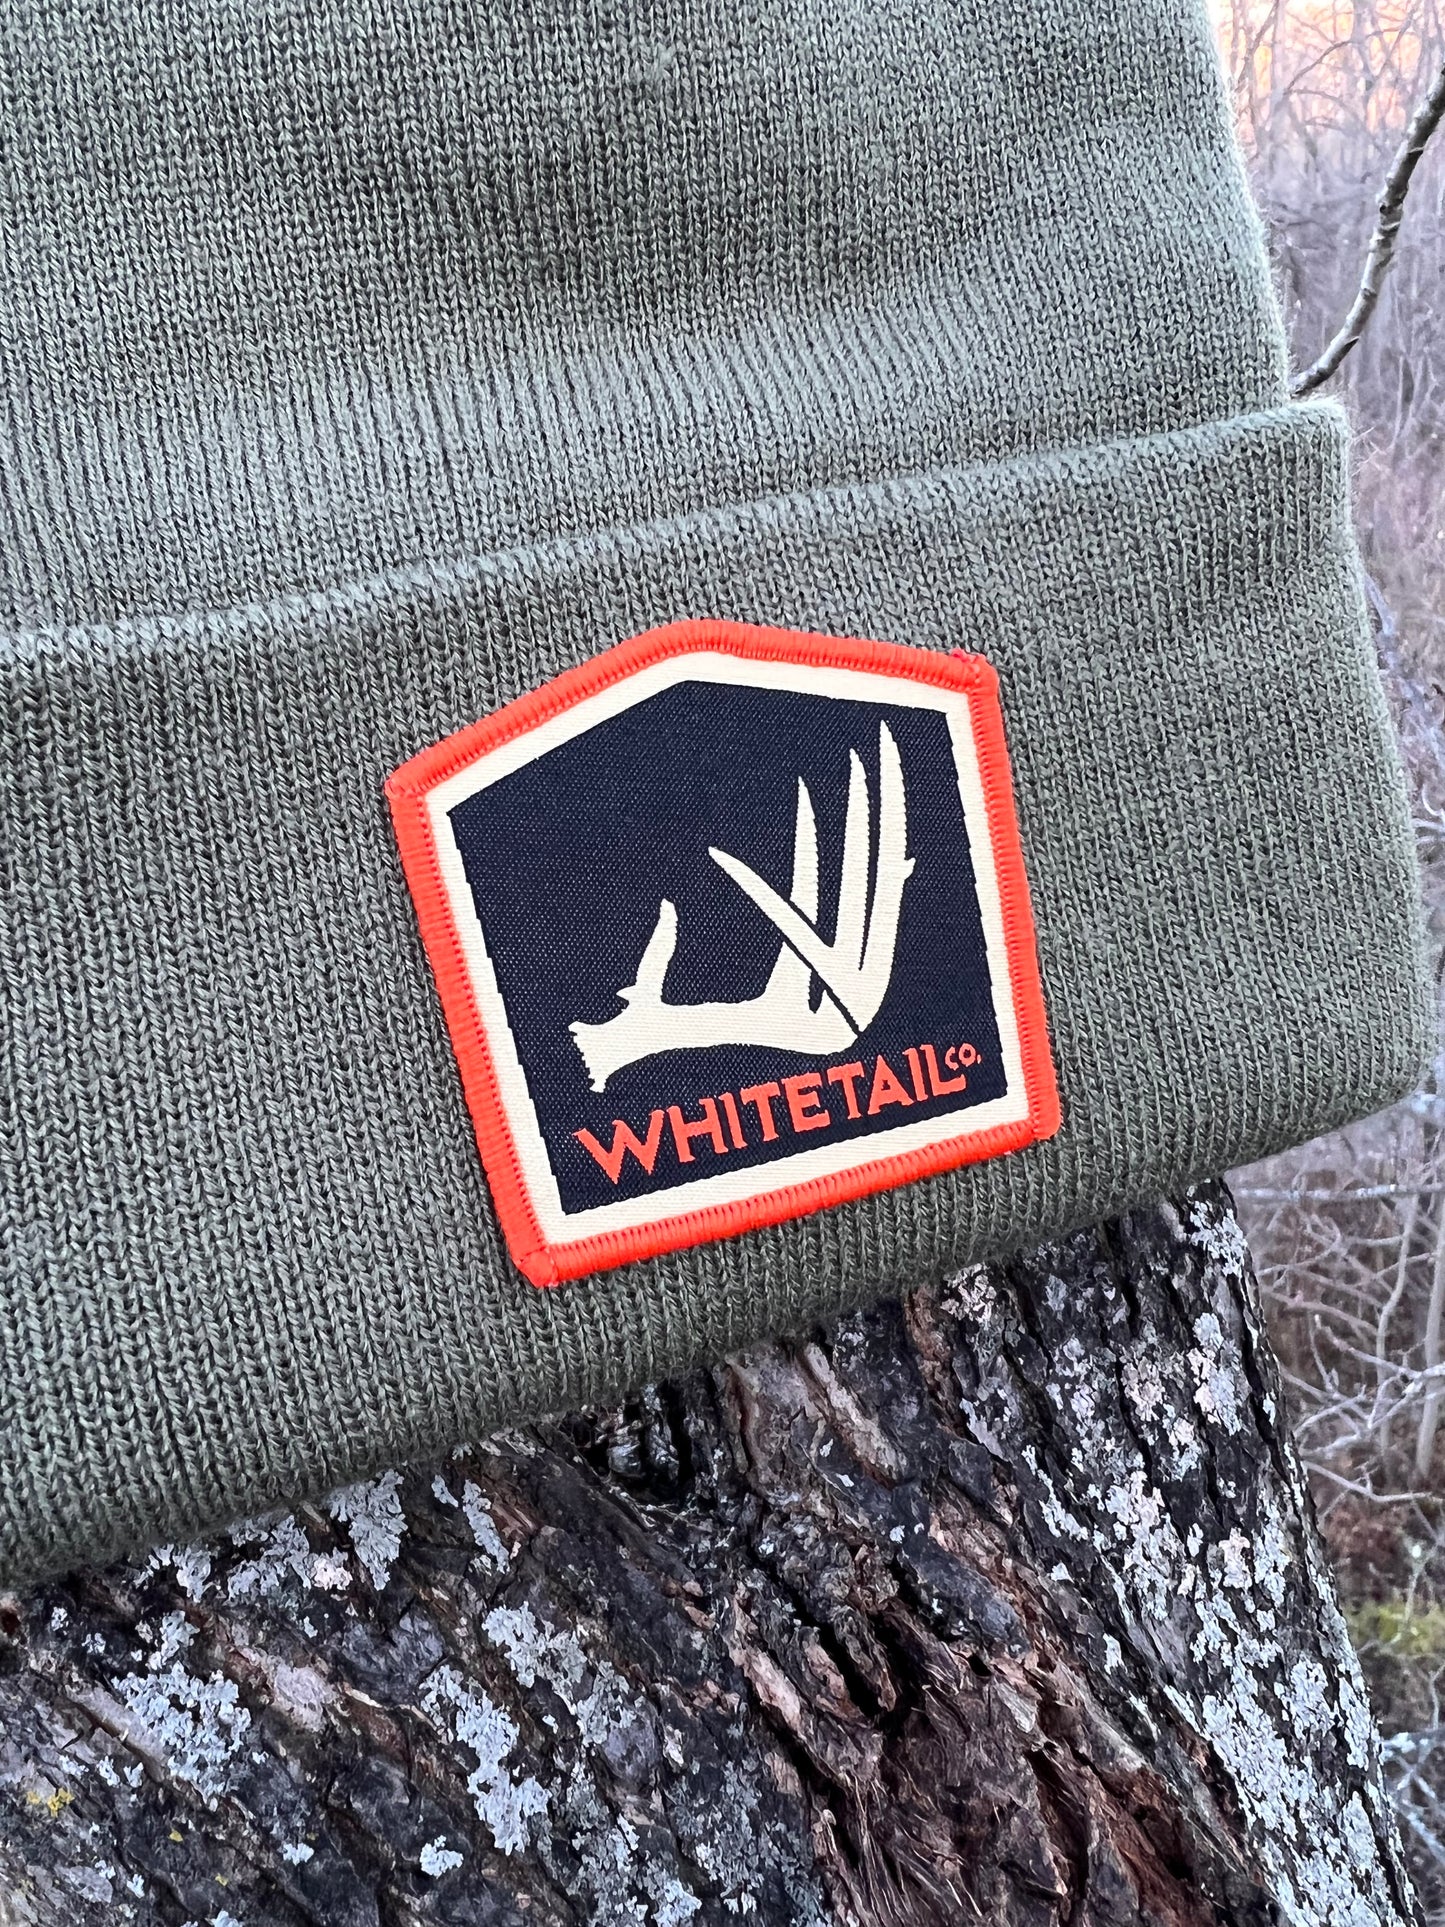 Whitetail Co. Knit Hat Olive Drab